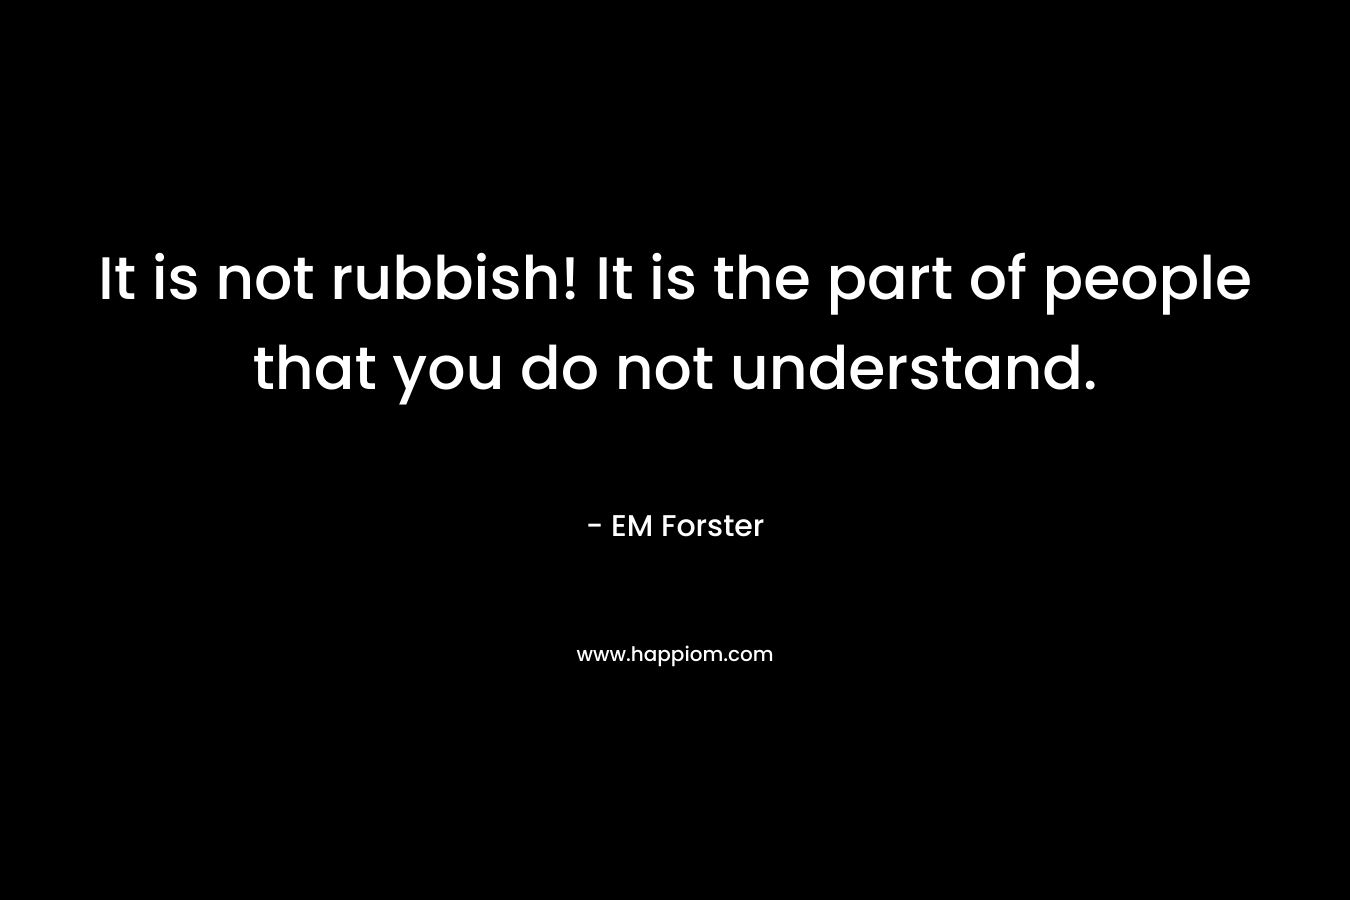 It is not rubbish! It is the part of people that you do not understand.